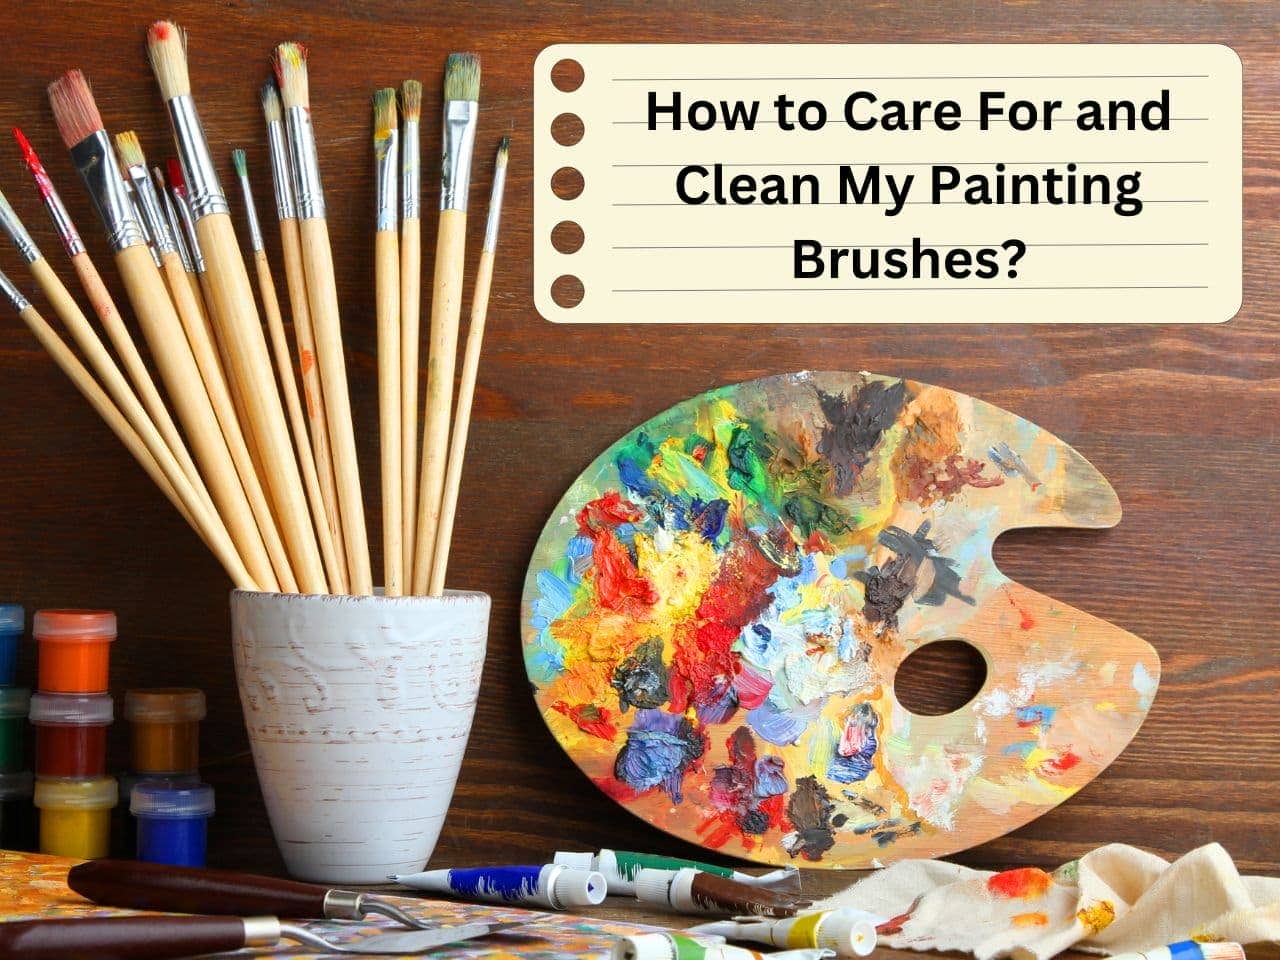 How to Care For and Clean My Painting Brushes